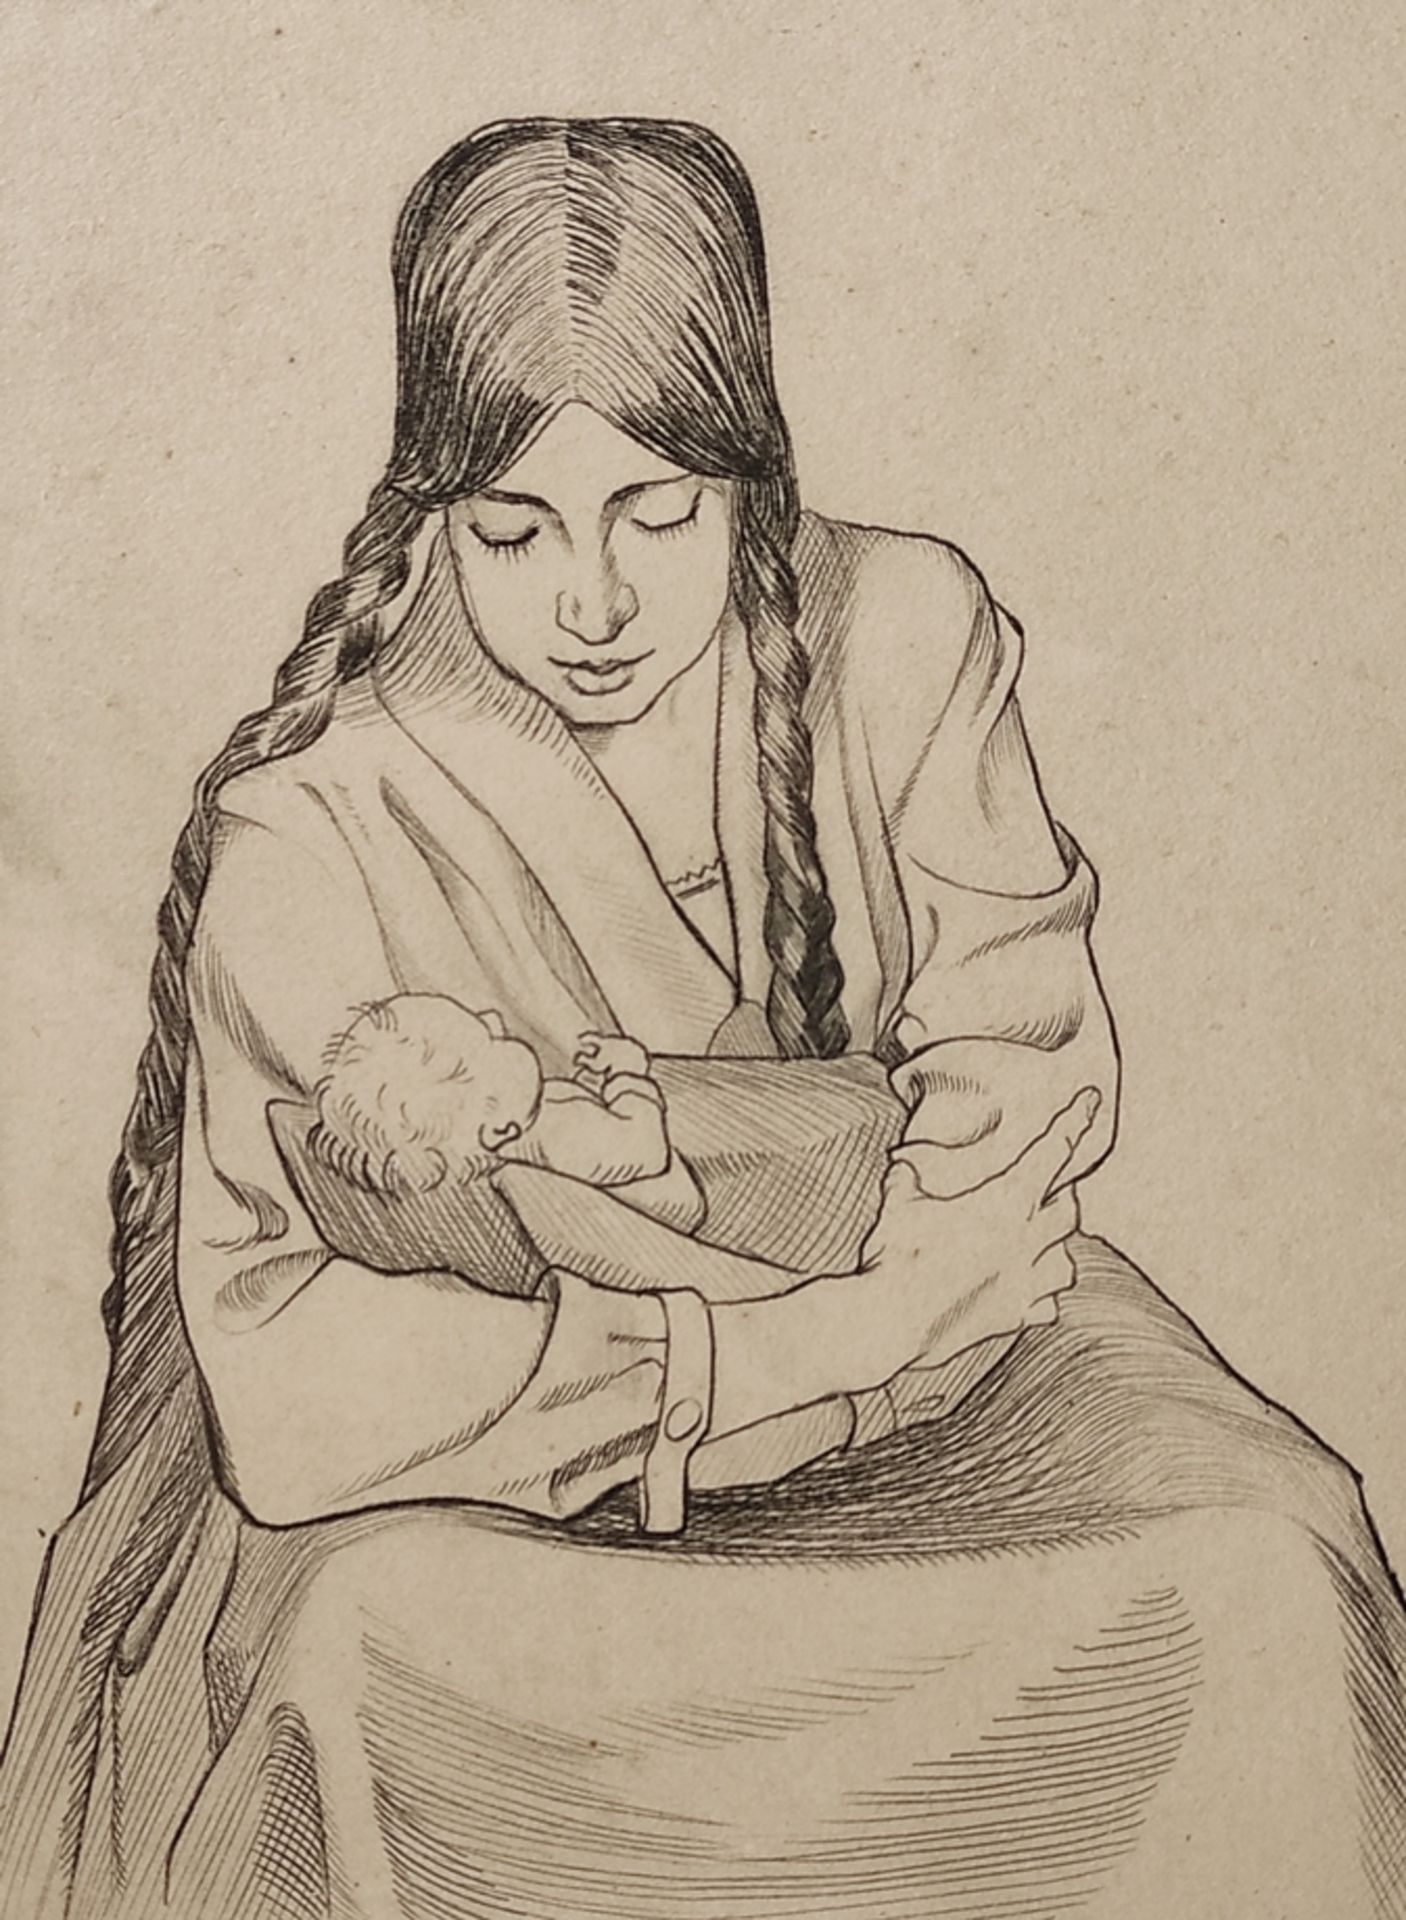 Weka, G. (20th century) "Young mother with child", etching, signed and dated (19)28 lower right, 17